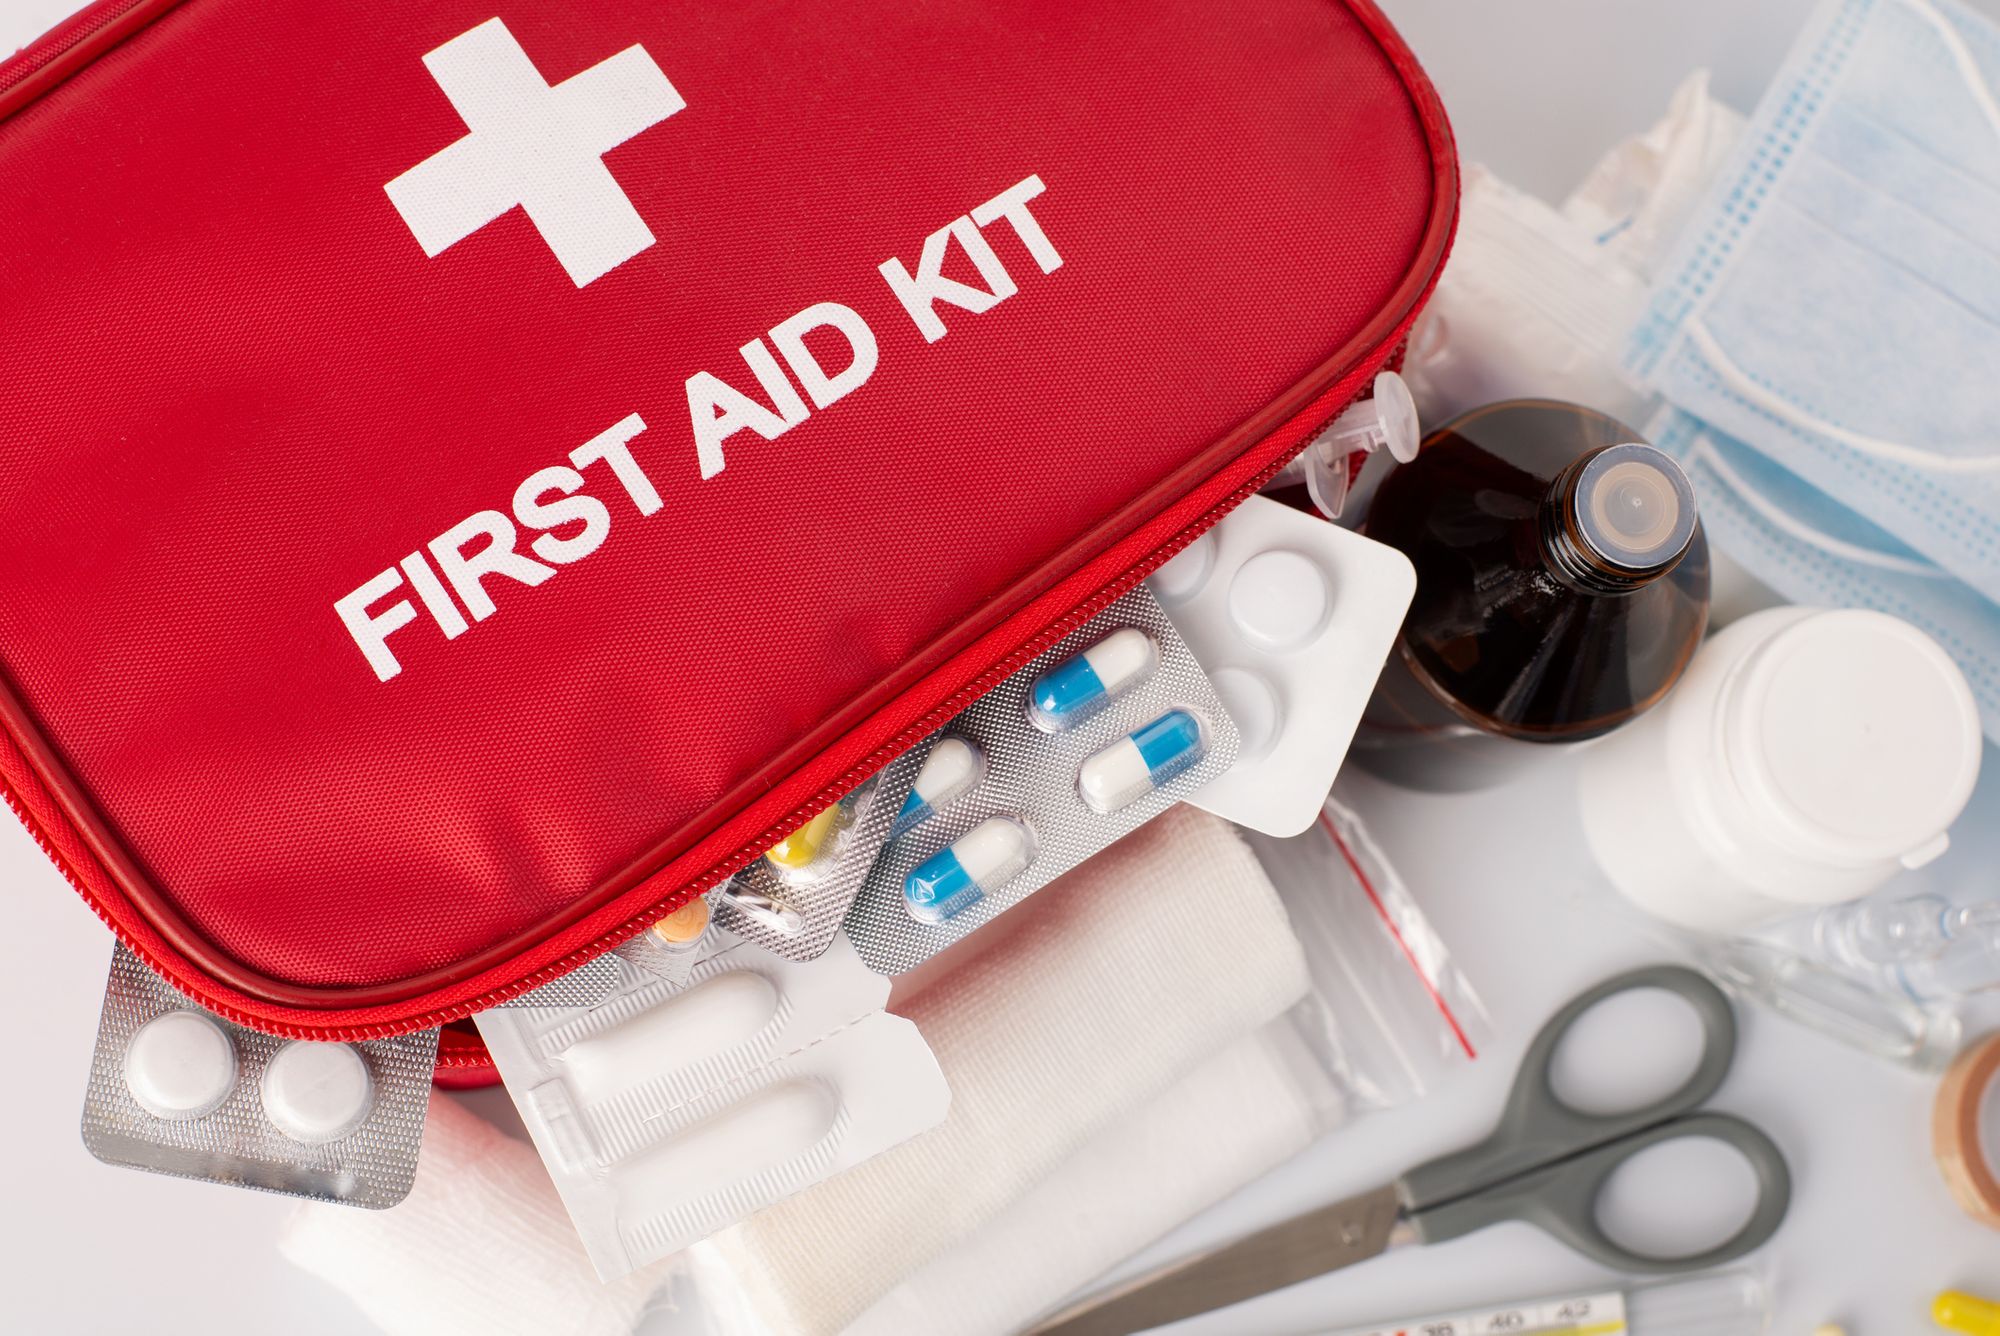 An open first aid kit.